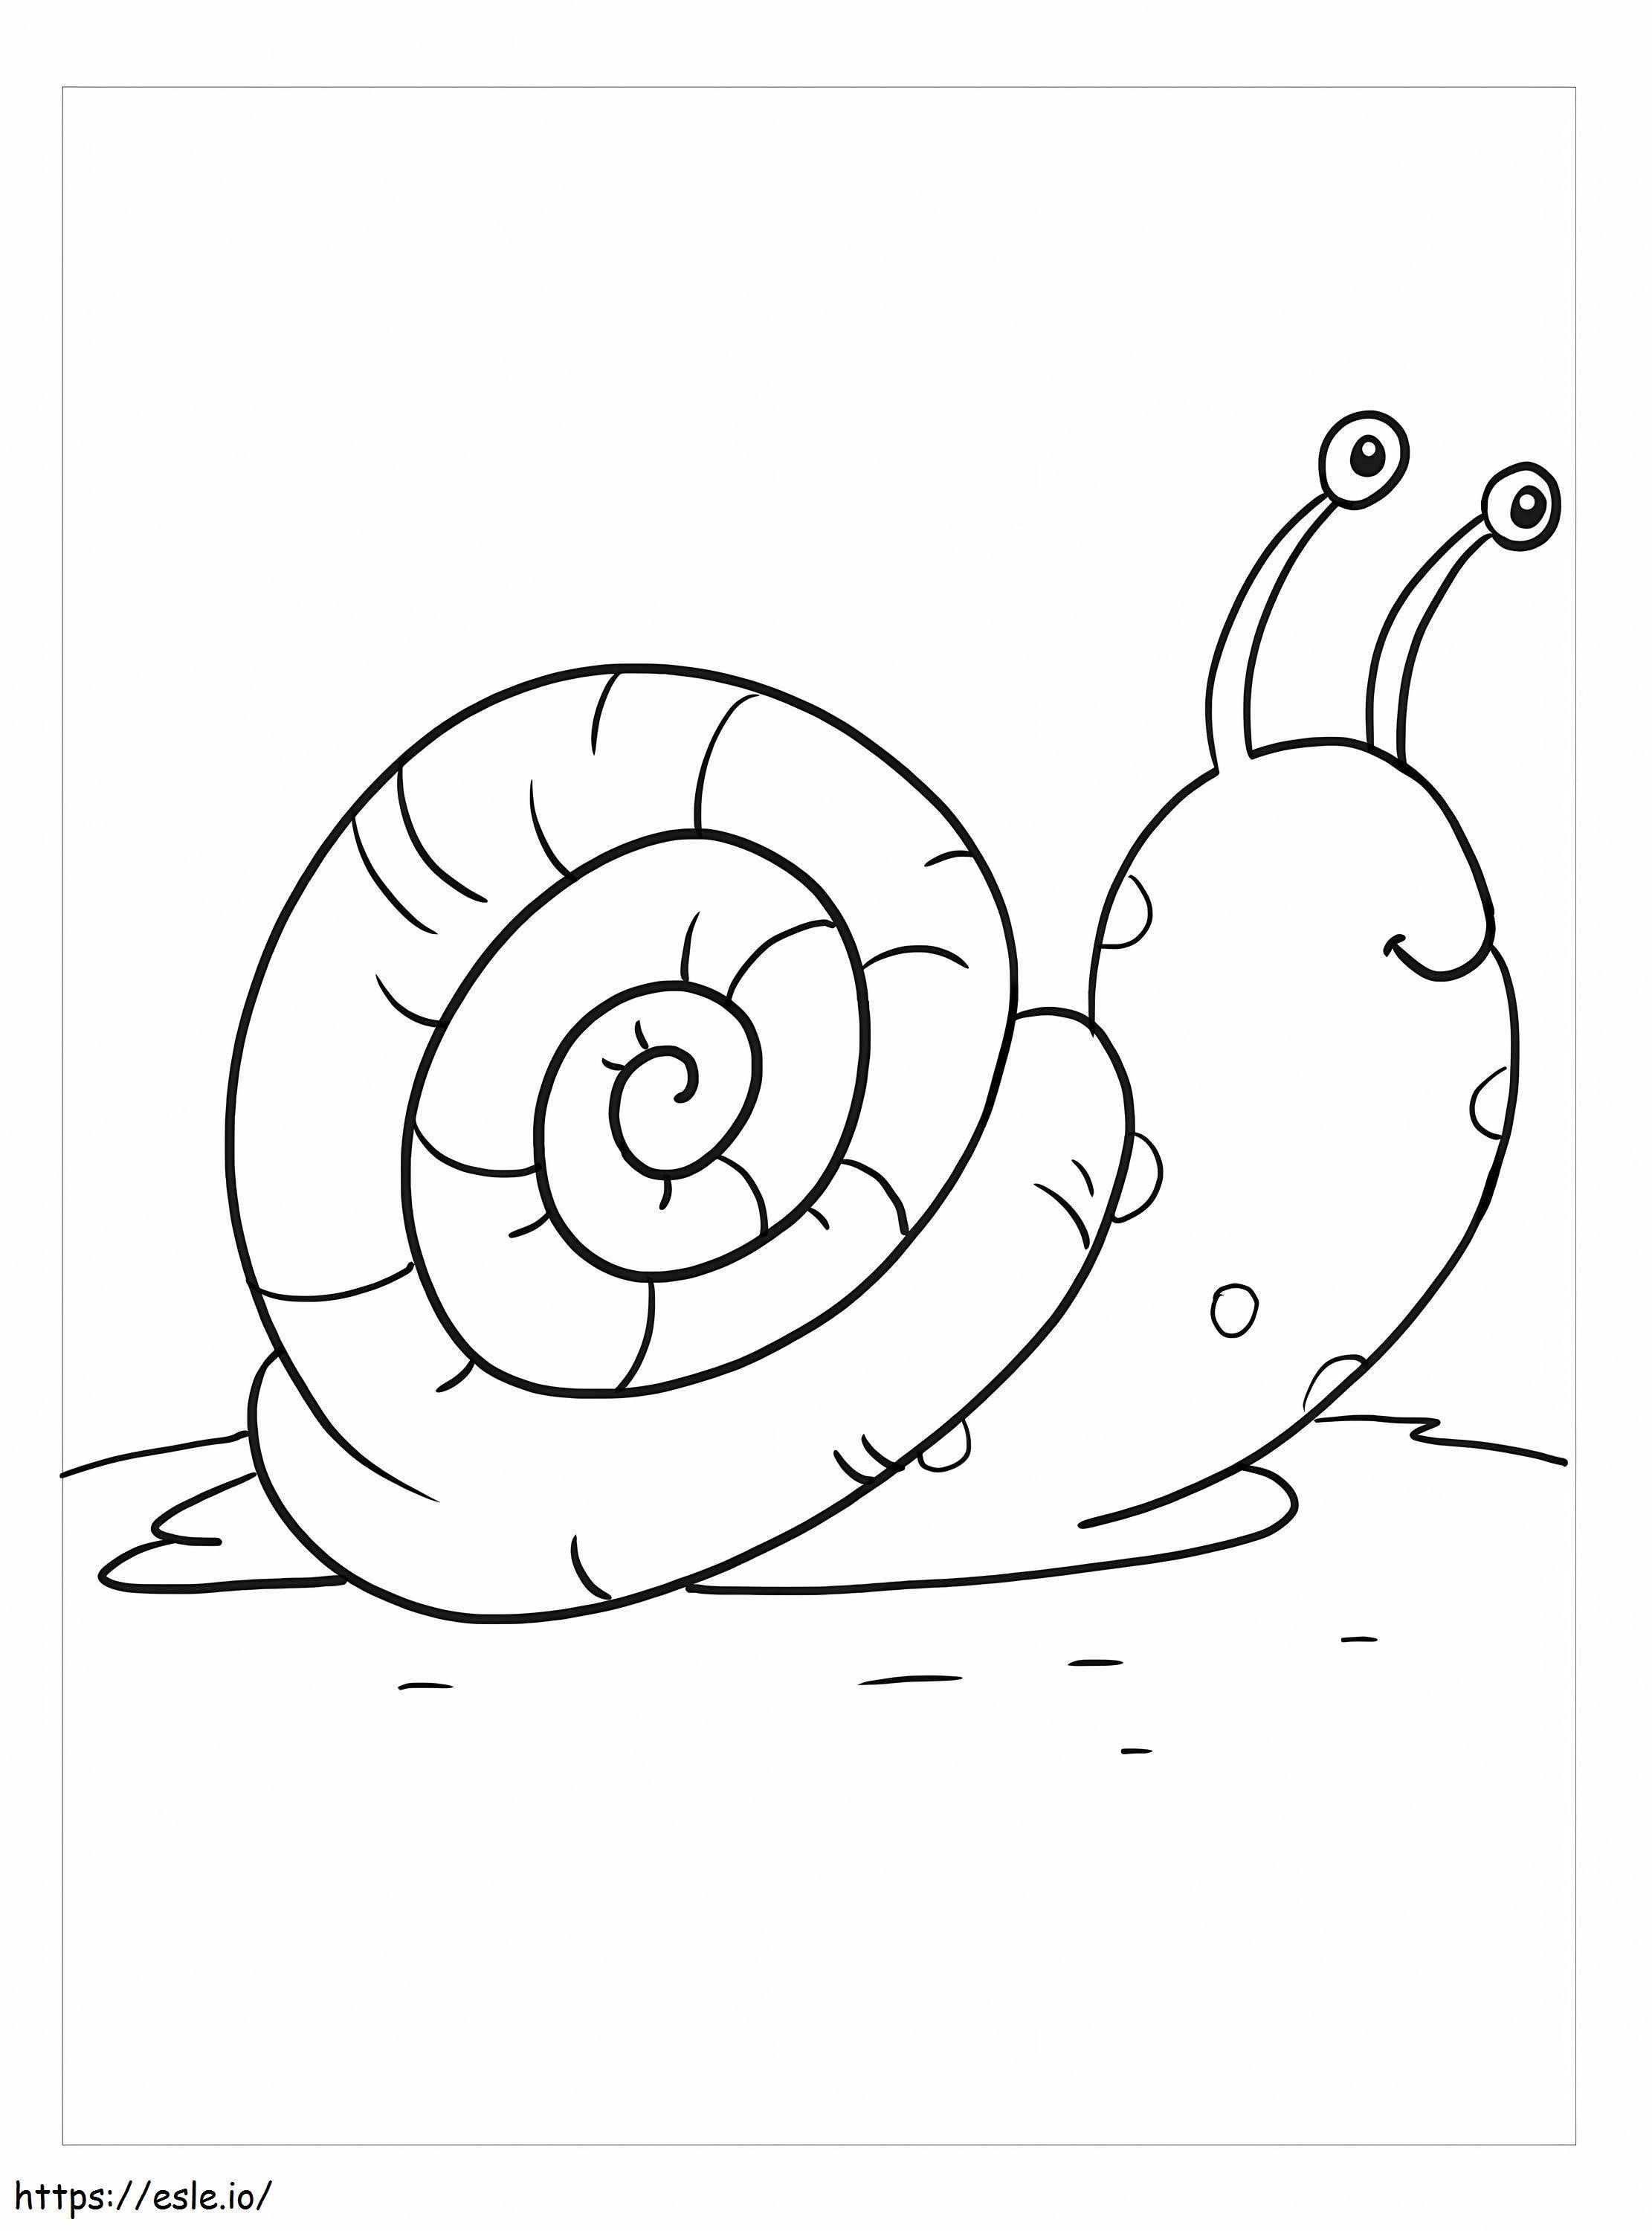 Good Snail coloring page